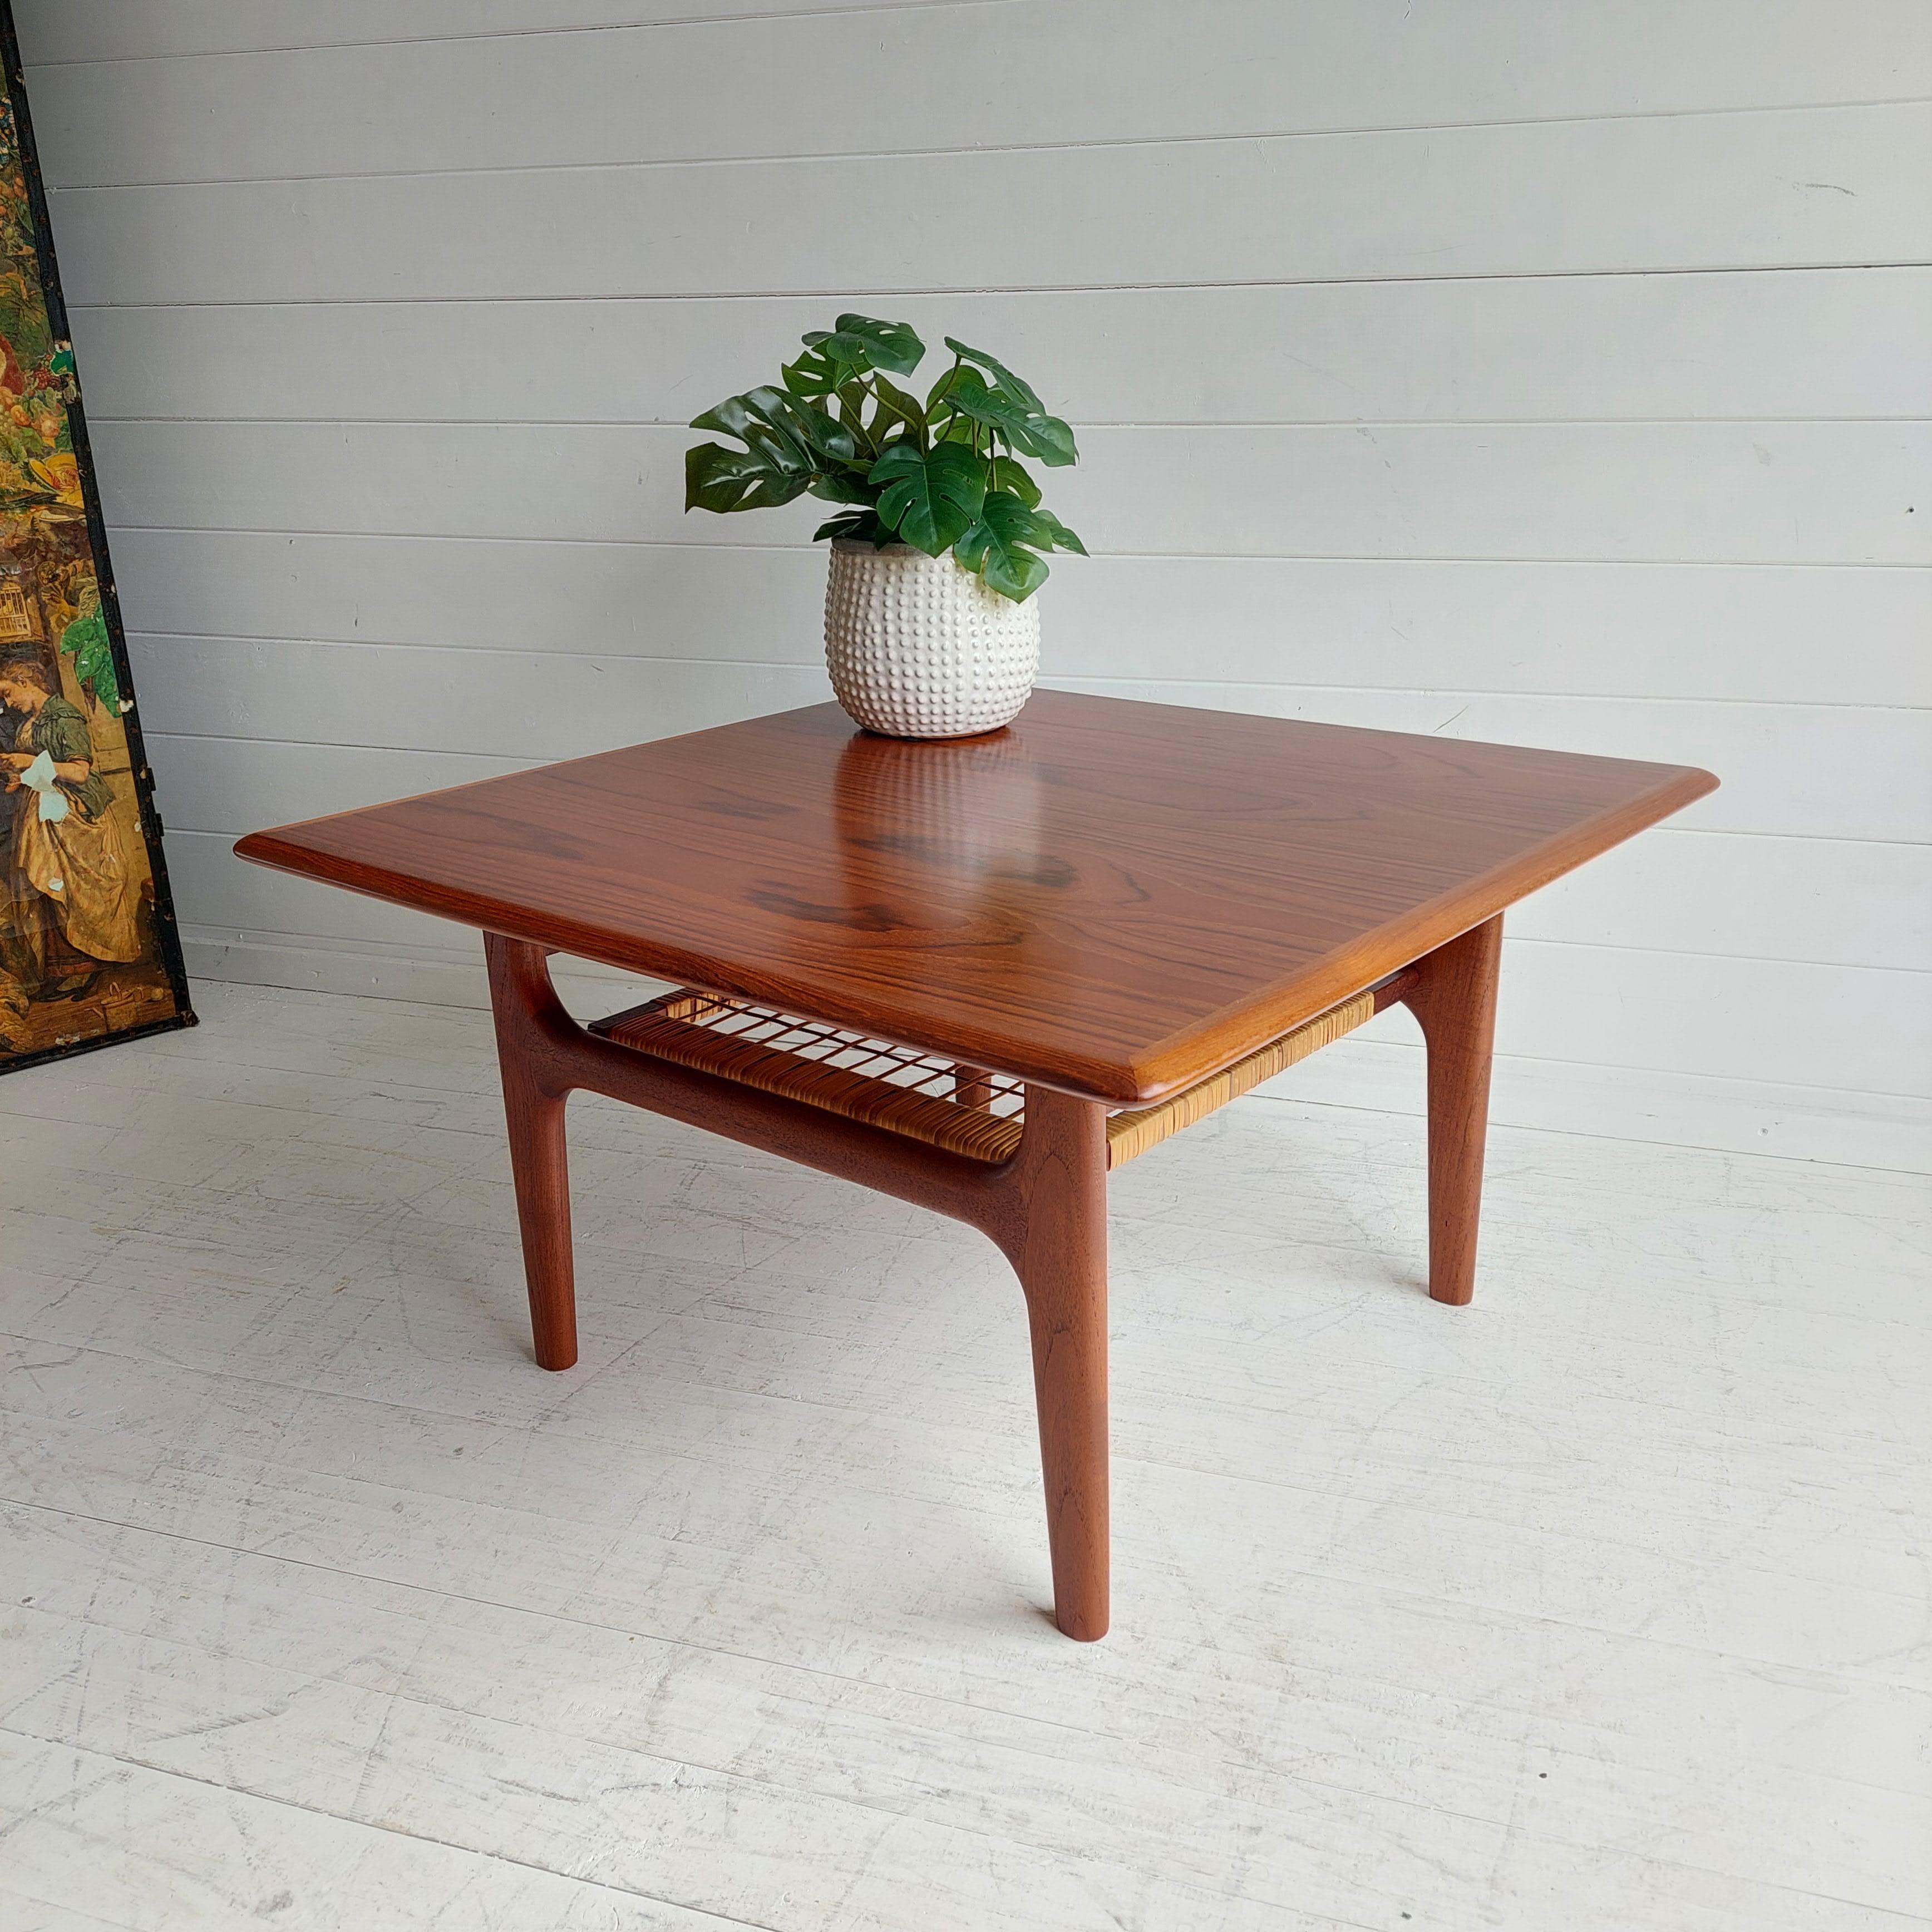 Mid-Century Modern Midcentury Danish 1960s Teak and Cane Coffee Table by Trioh Møbler